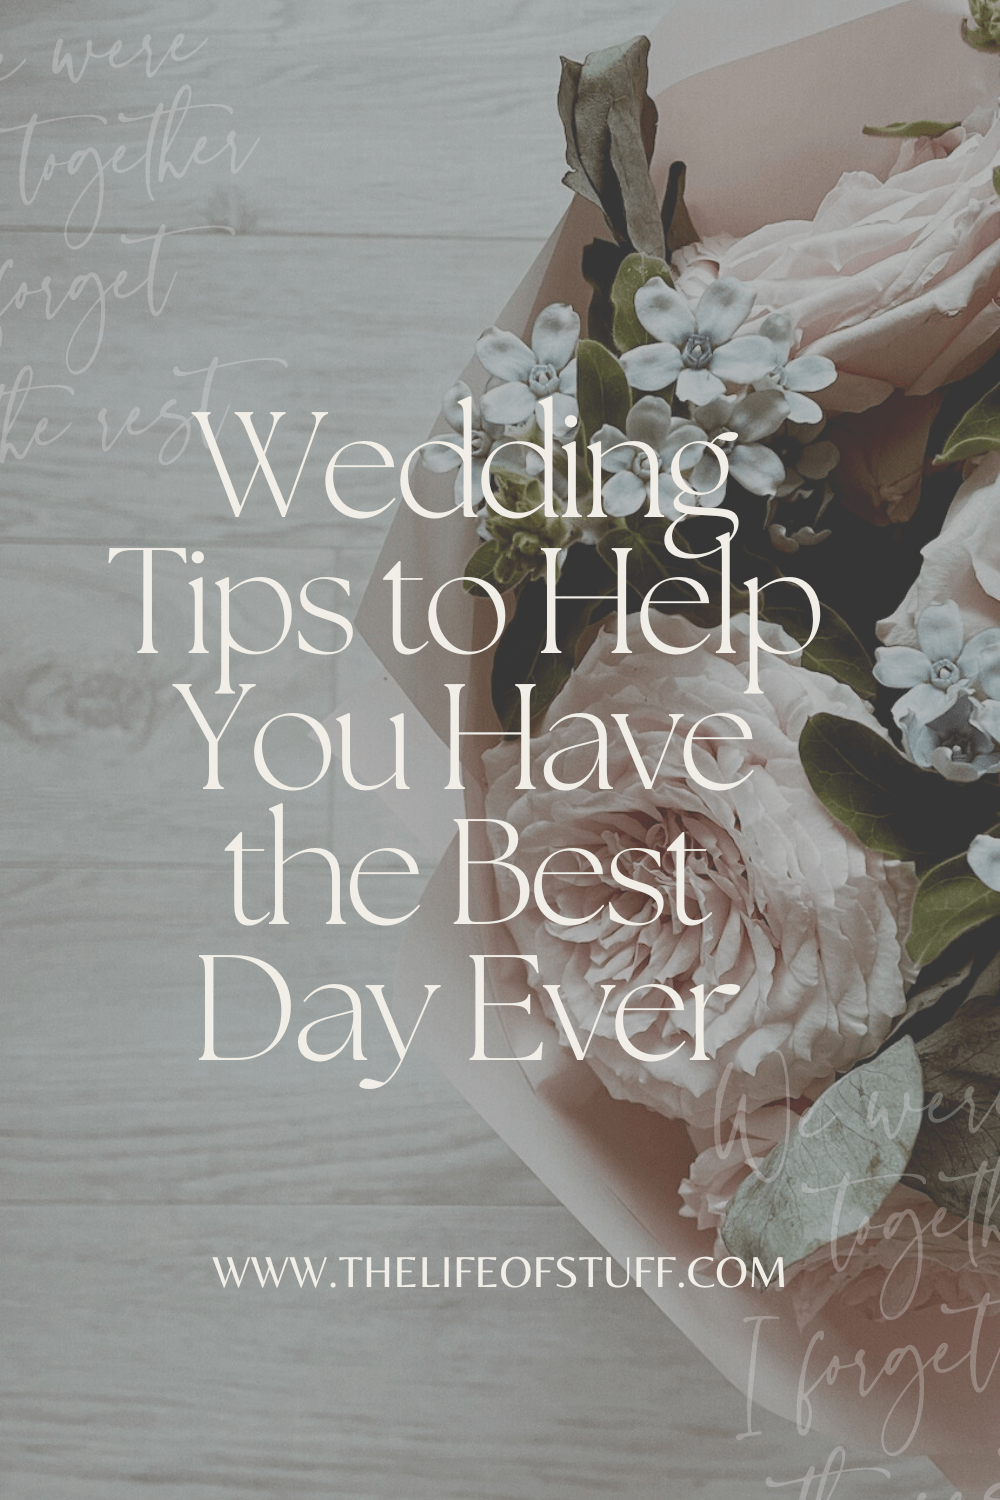 Wedding Tips to Help You Have the Best Day Ever - The Life of Stuff